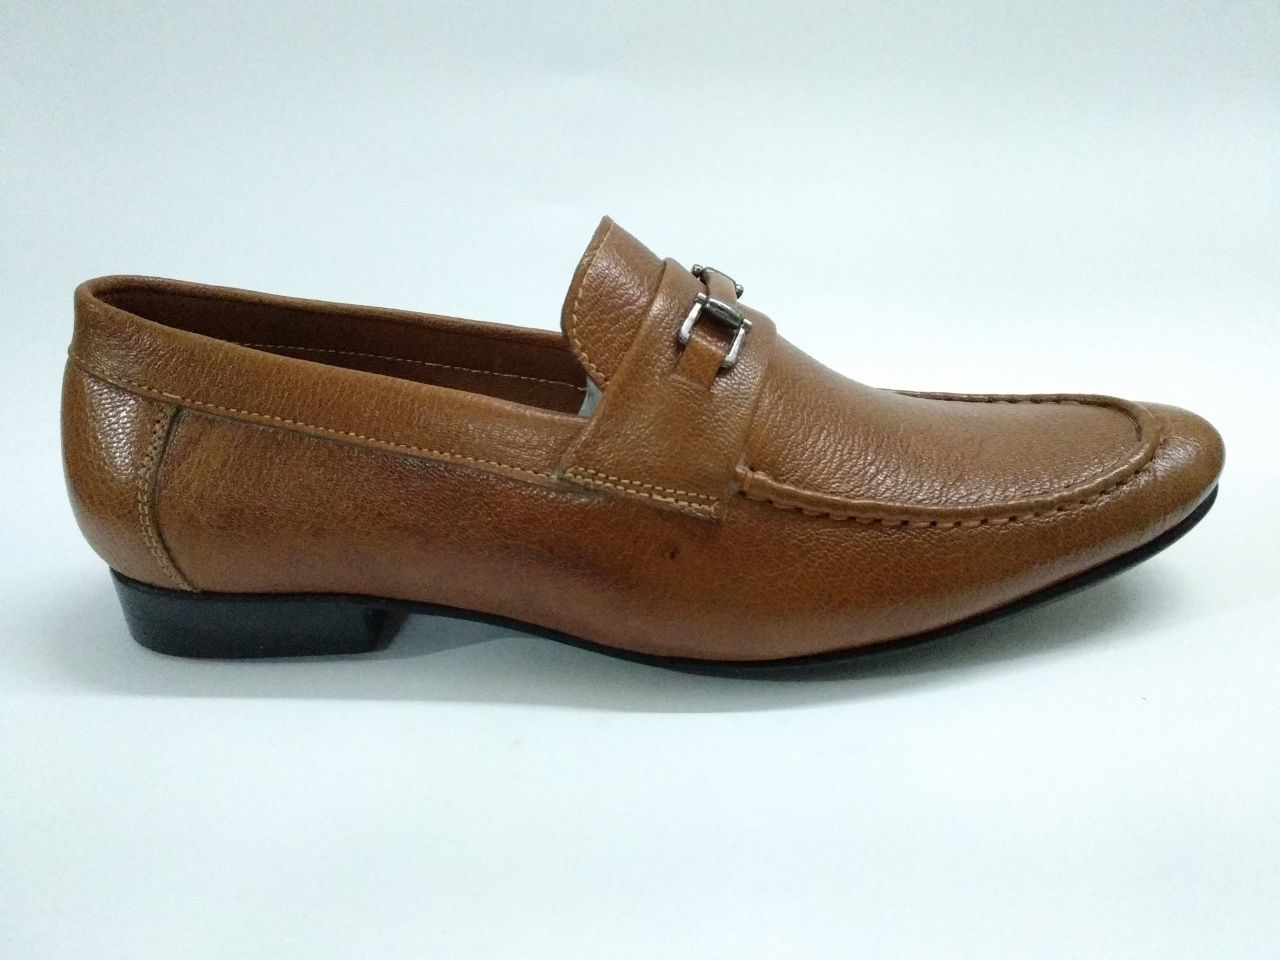 TAN COLOUR LEATHER LOAFER FOR  MEN'S